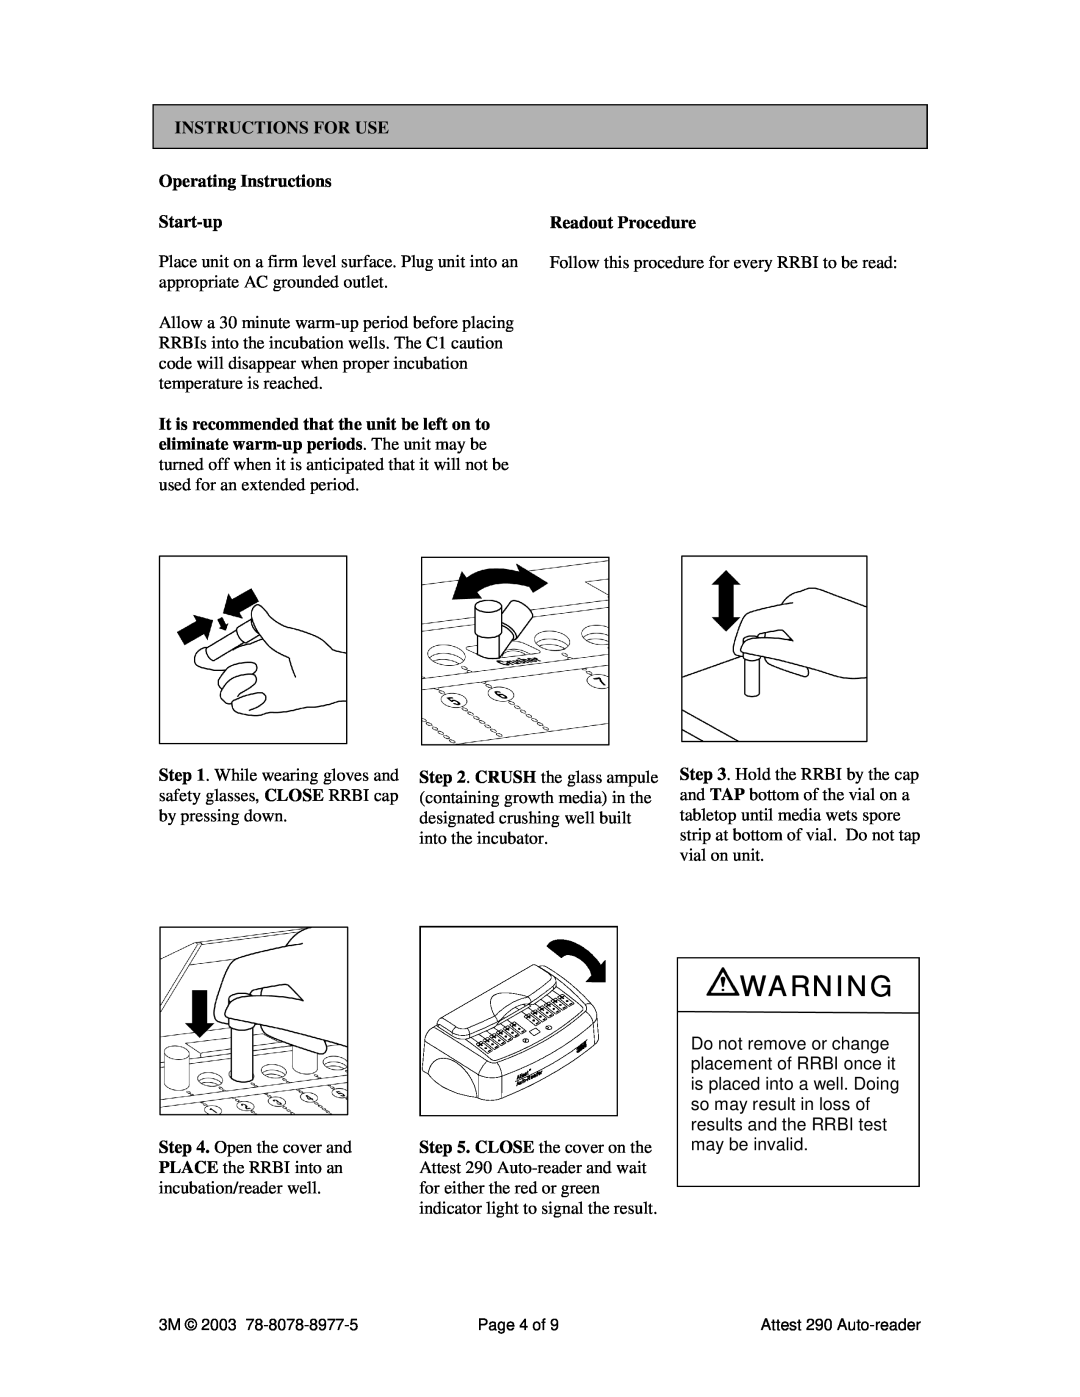 3M 290 manual Instructions For Use, Operating Instructions Start-up, Readout Procedure 